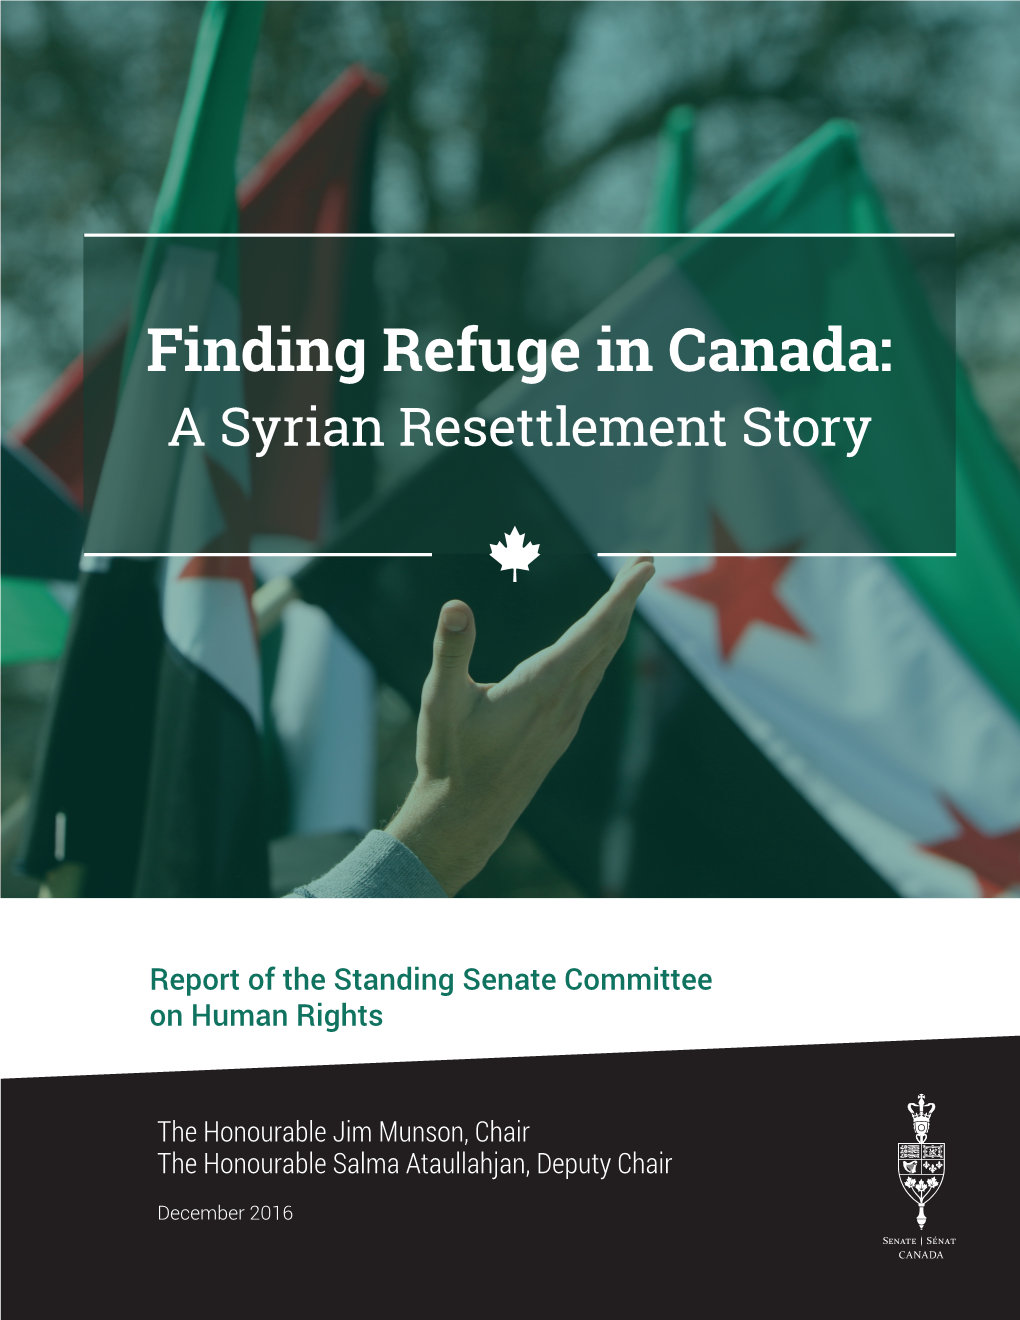 Finding Refuge in Canada: a Syrian Resettlement Story